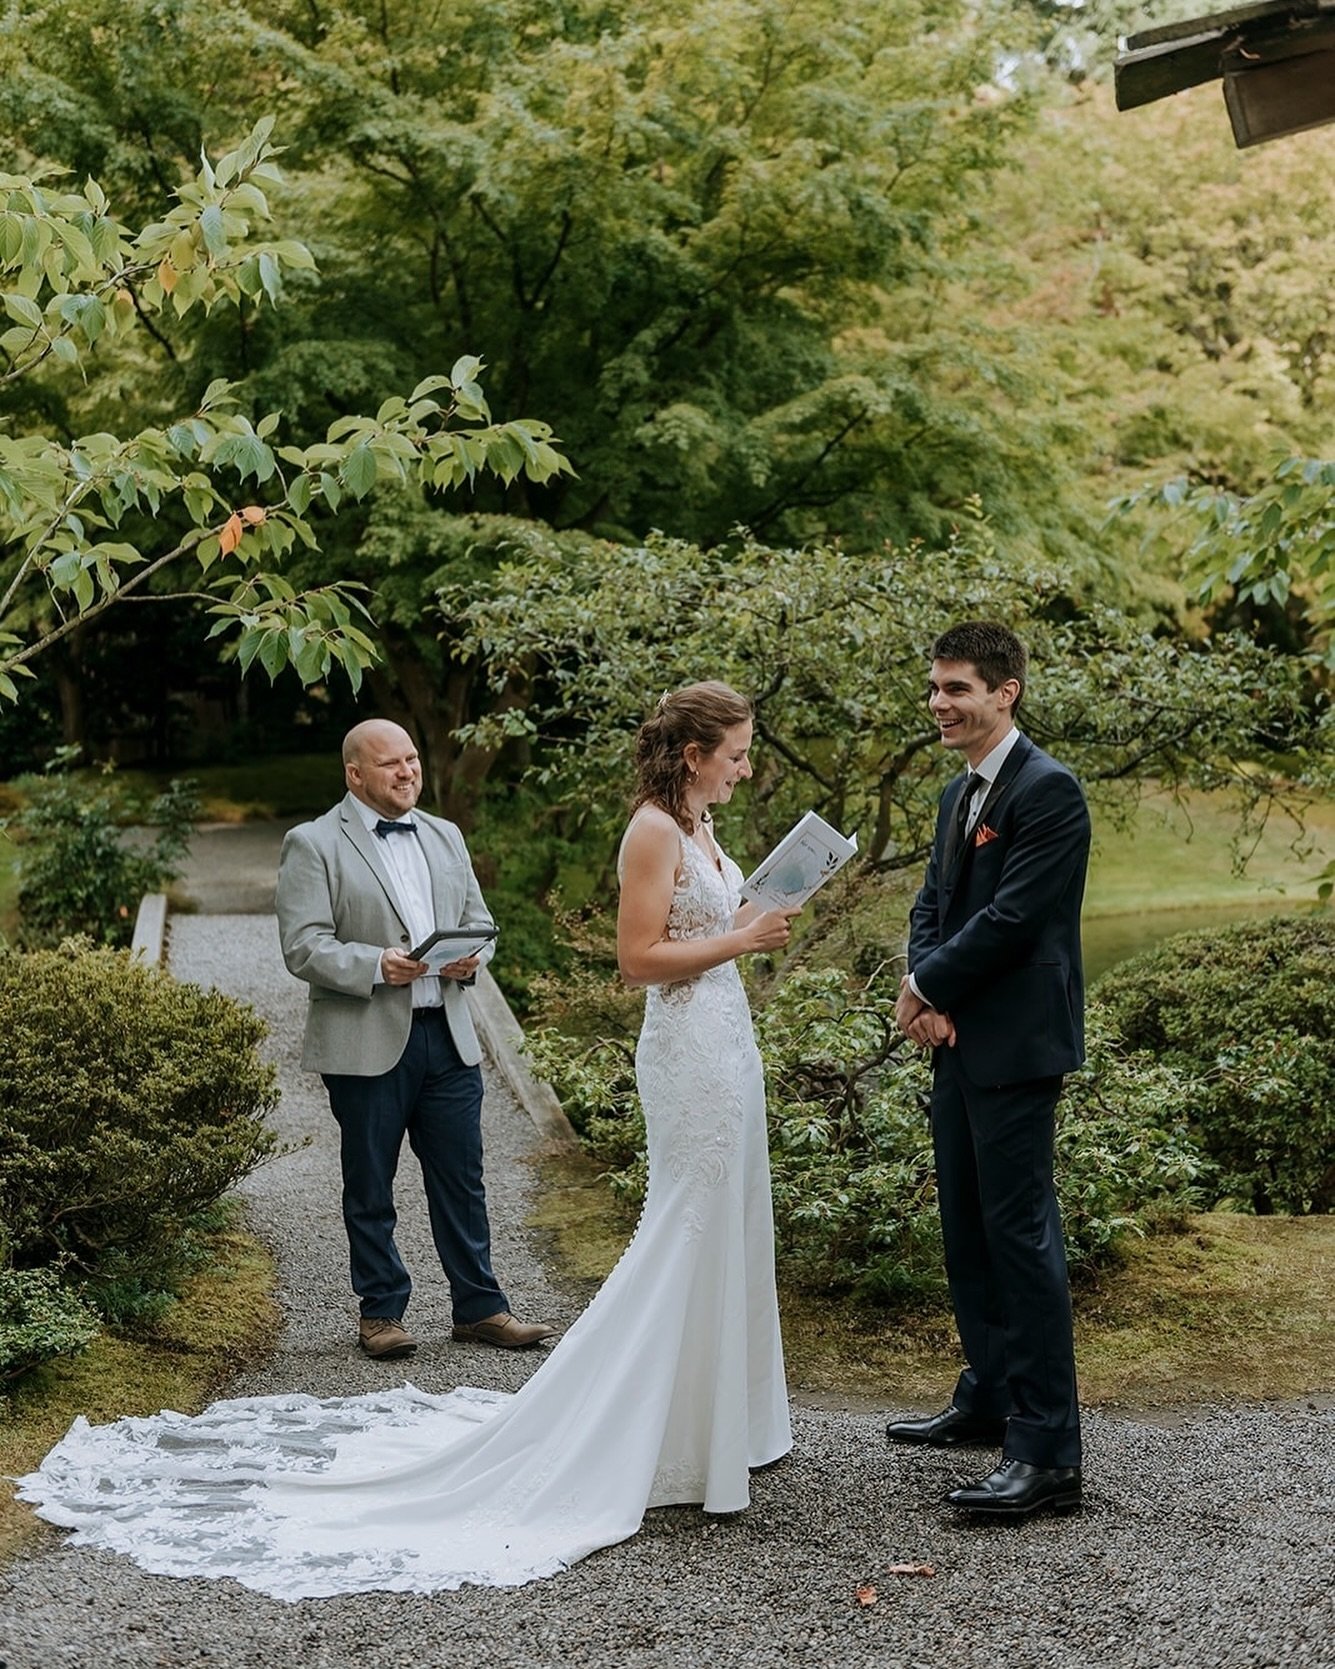 When working with our team we want you to feel like you&rsquo;re able to have a ceremony that is focused around you and the love of your life! 
⠀⠀⠀⠀⠀⠀⠀⠀⠀
Little things like stepping aside during your vows so you are fully focused on tour partner are 